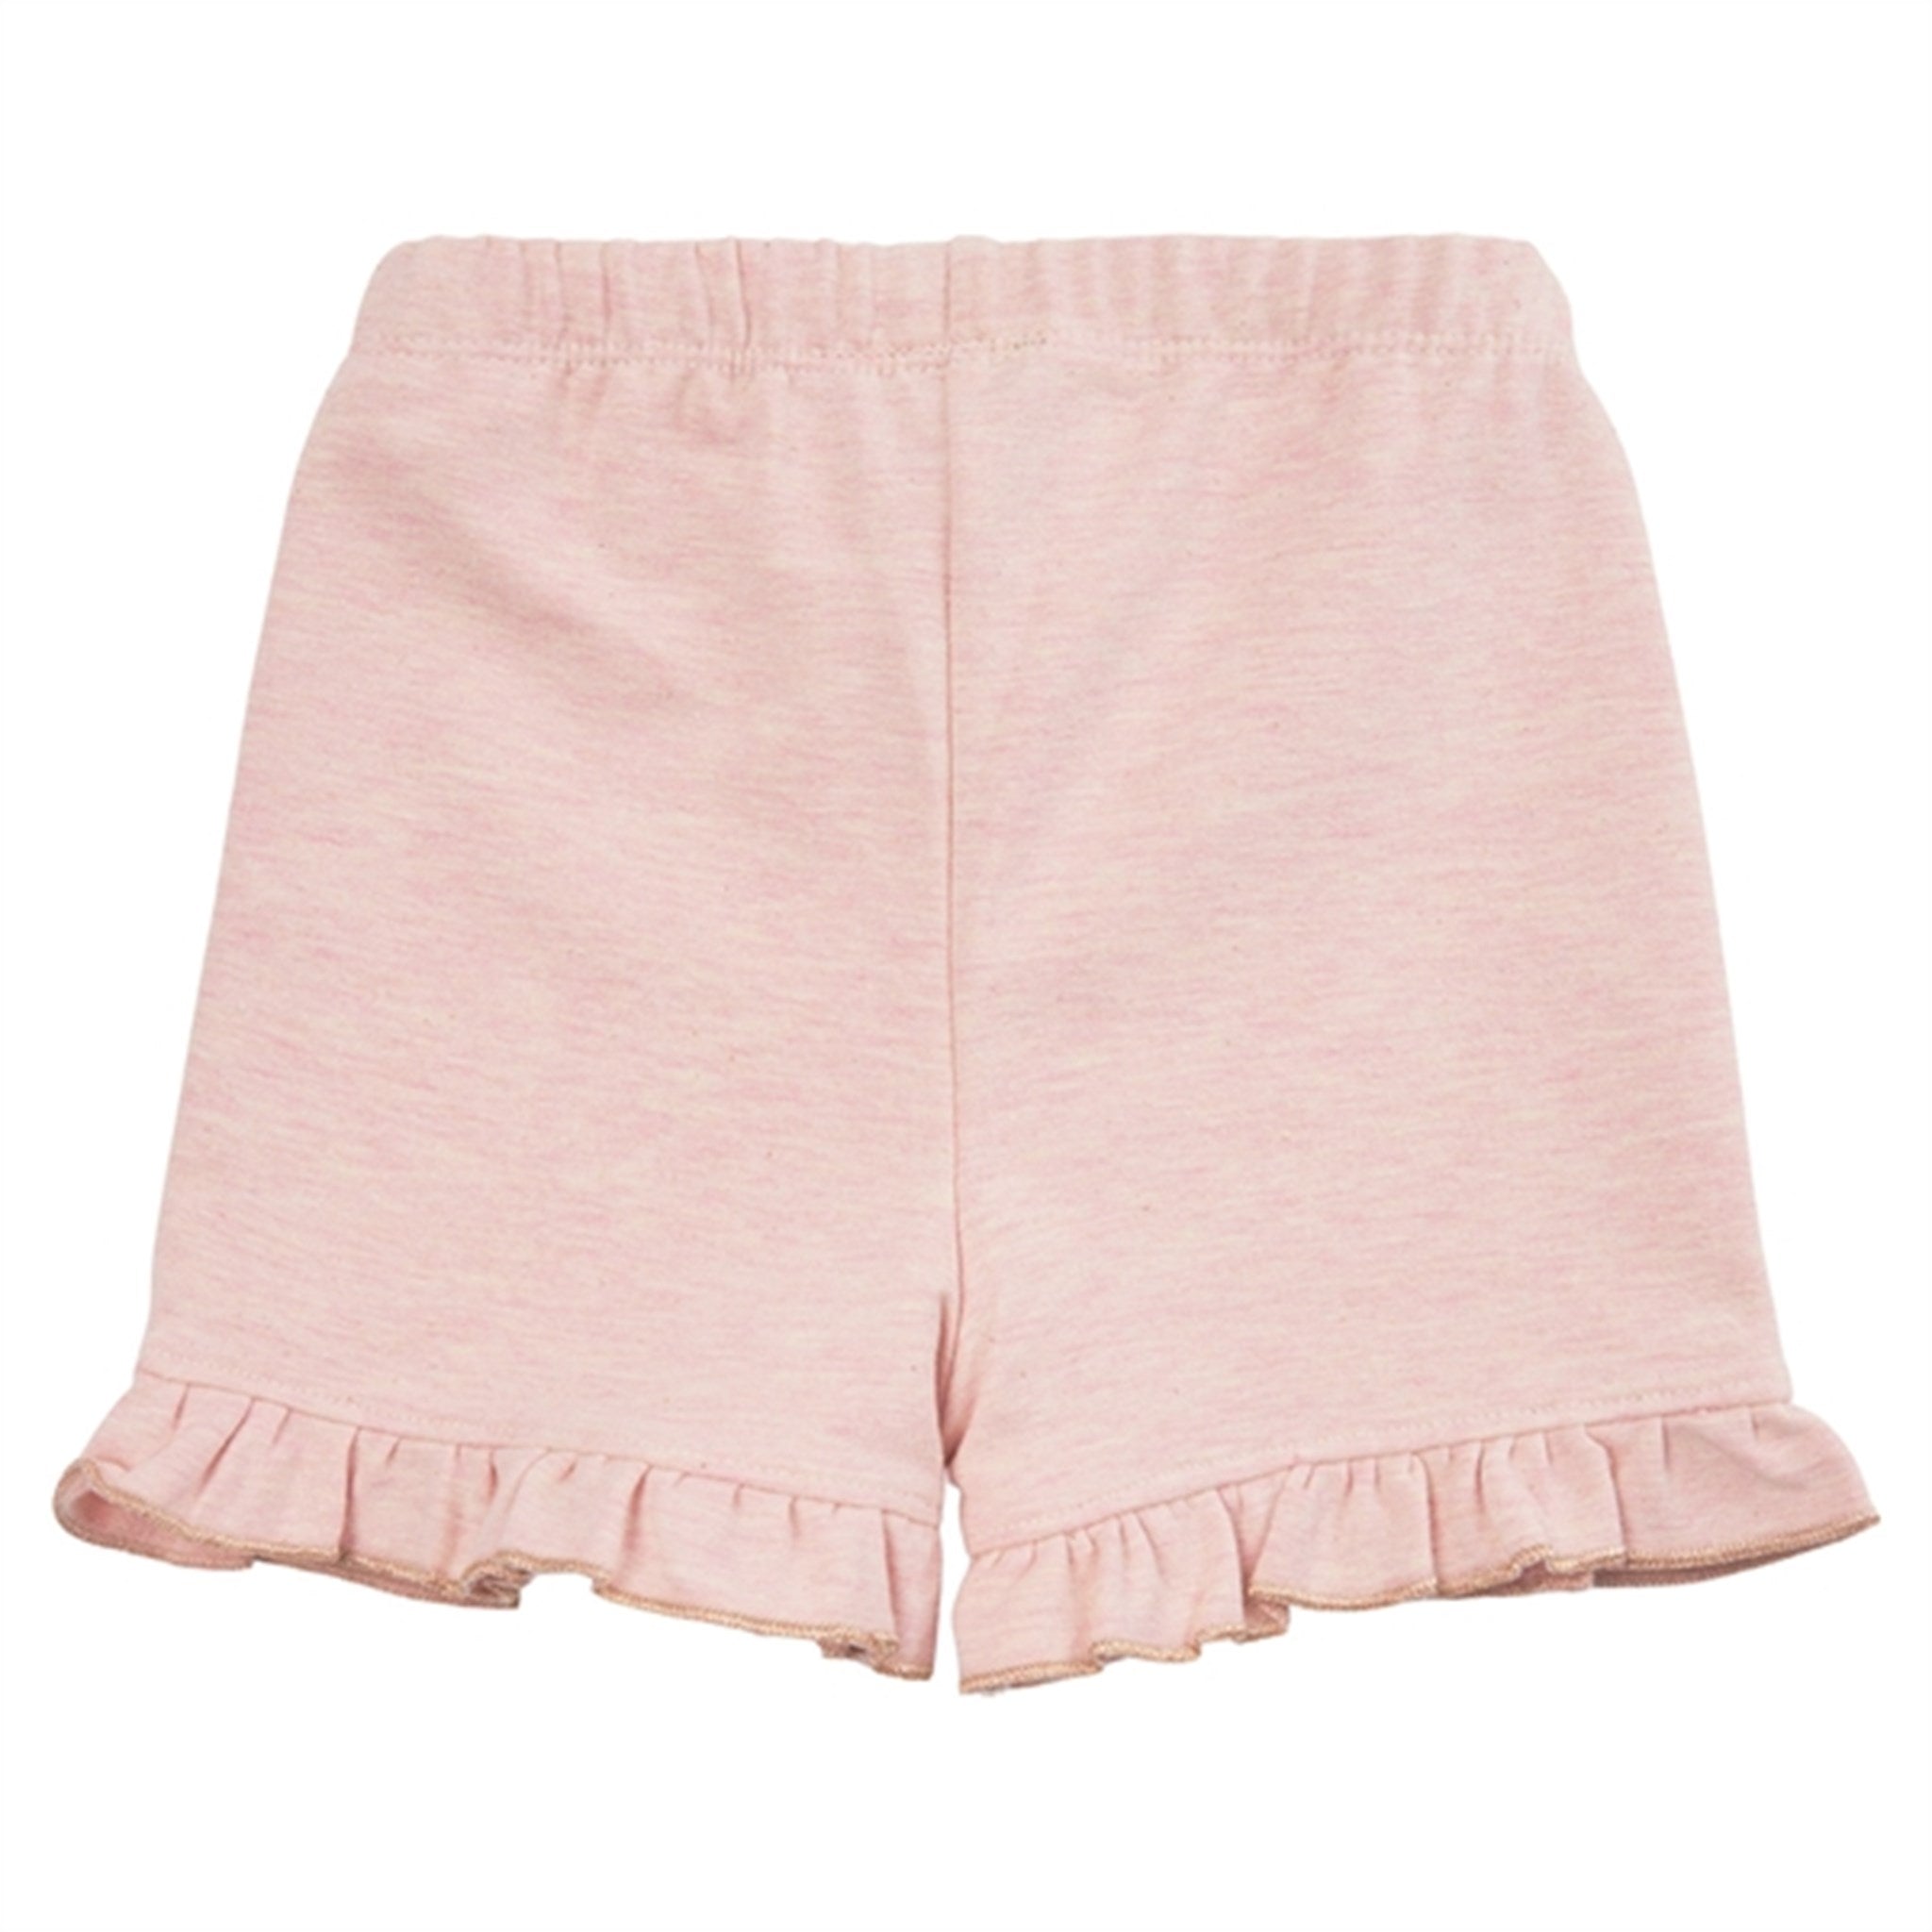 Petit by Sofie Schnoor Rose Blush Shorts 2